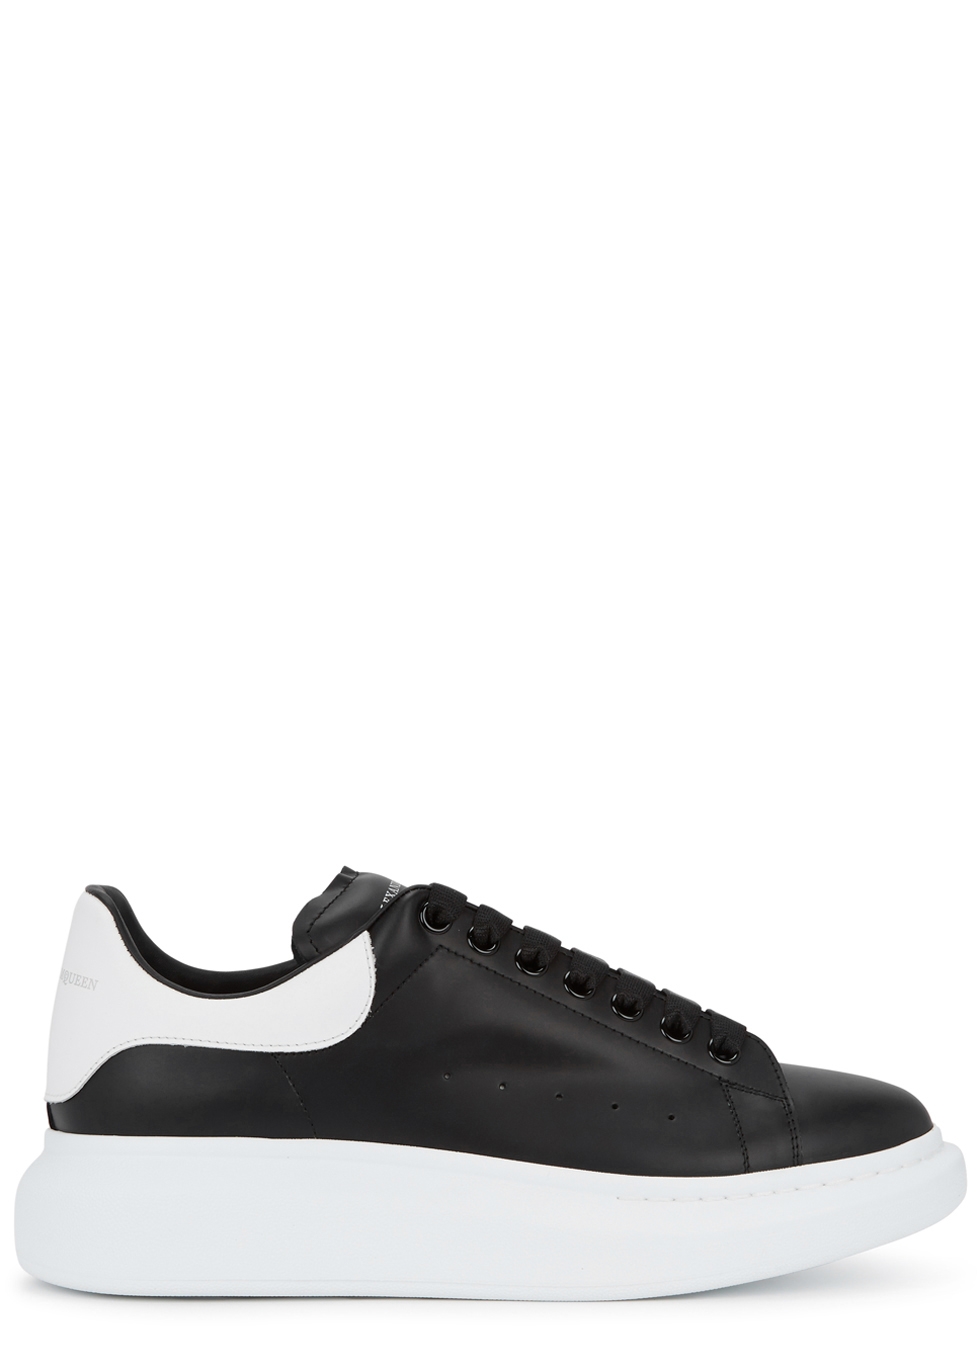 alexander mcqueen larry white leather trainers